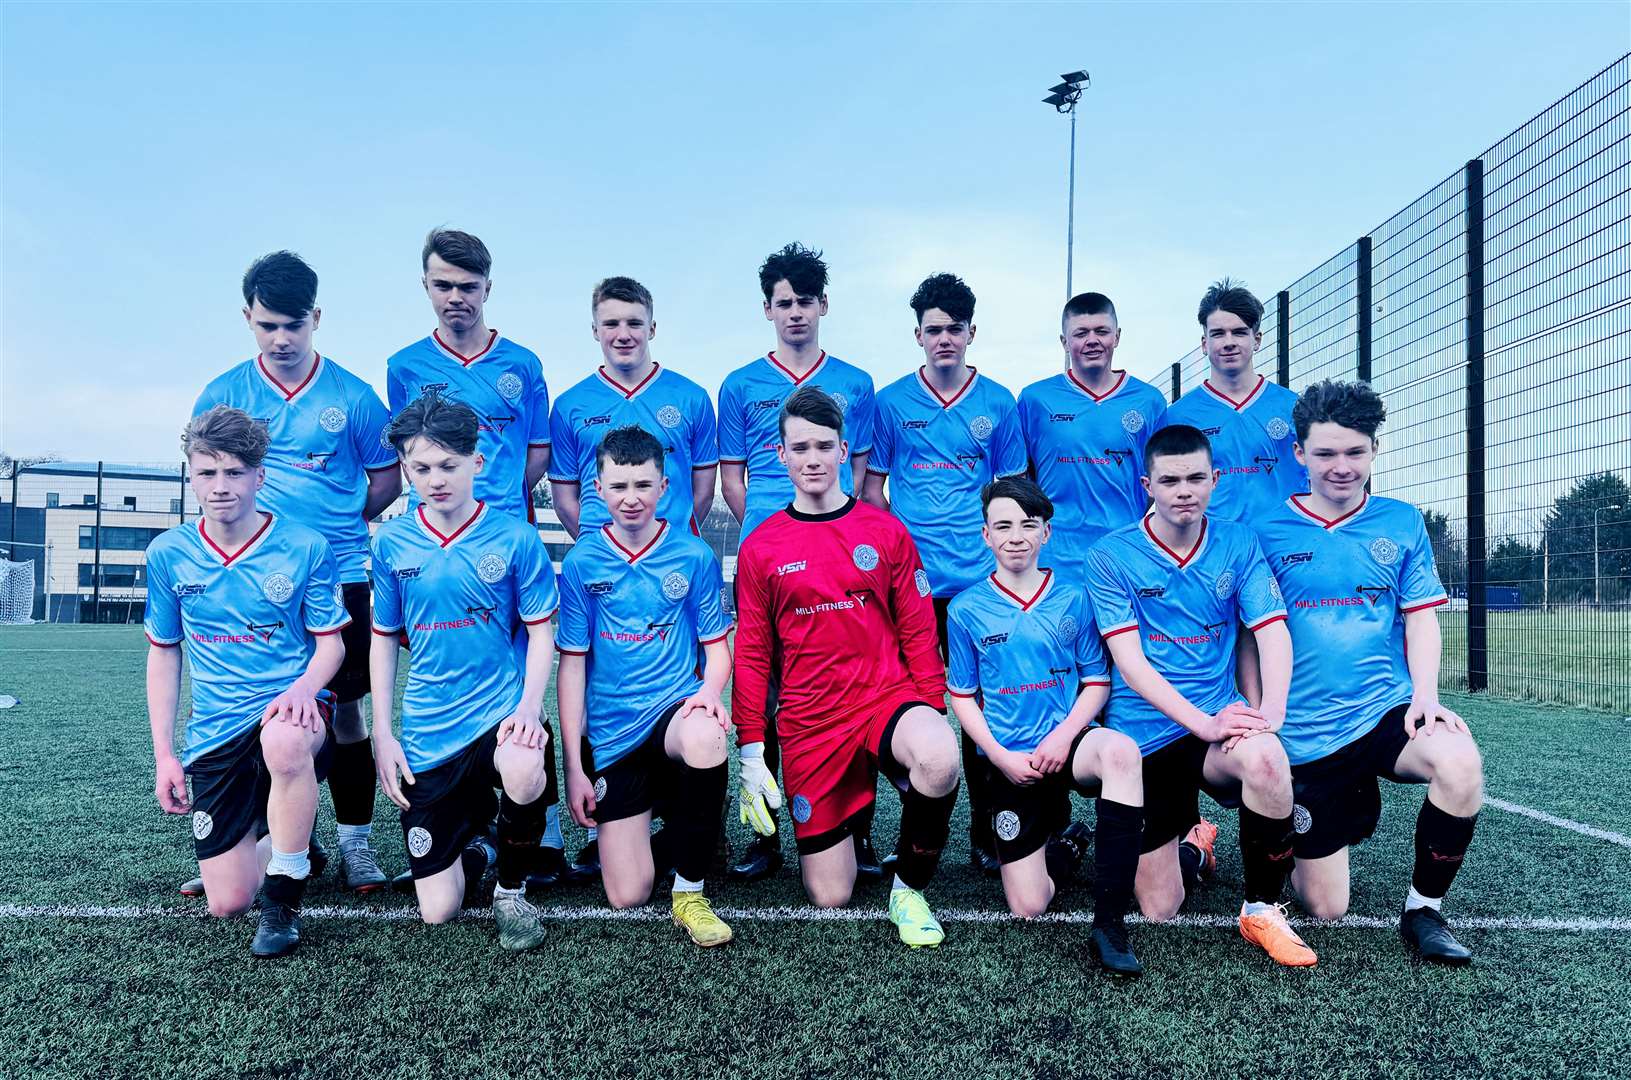 The Caithness United U16s who took on league leaders Balloan City in Inverness.